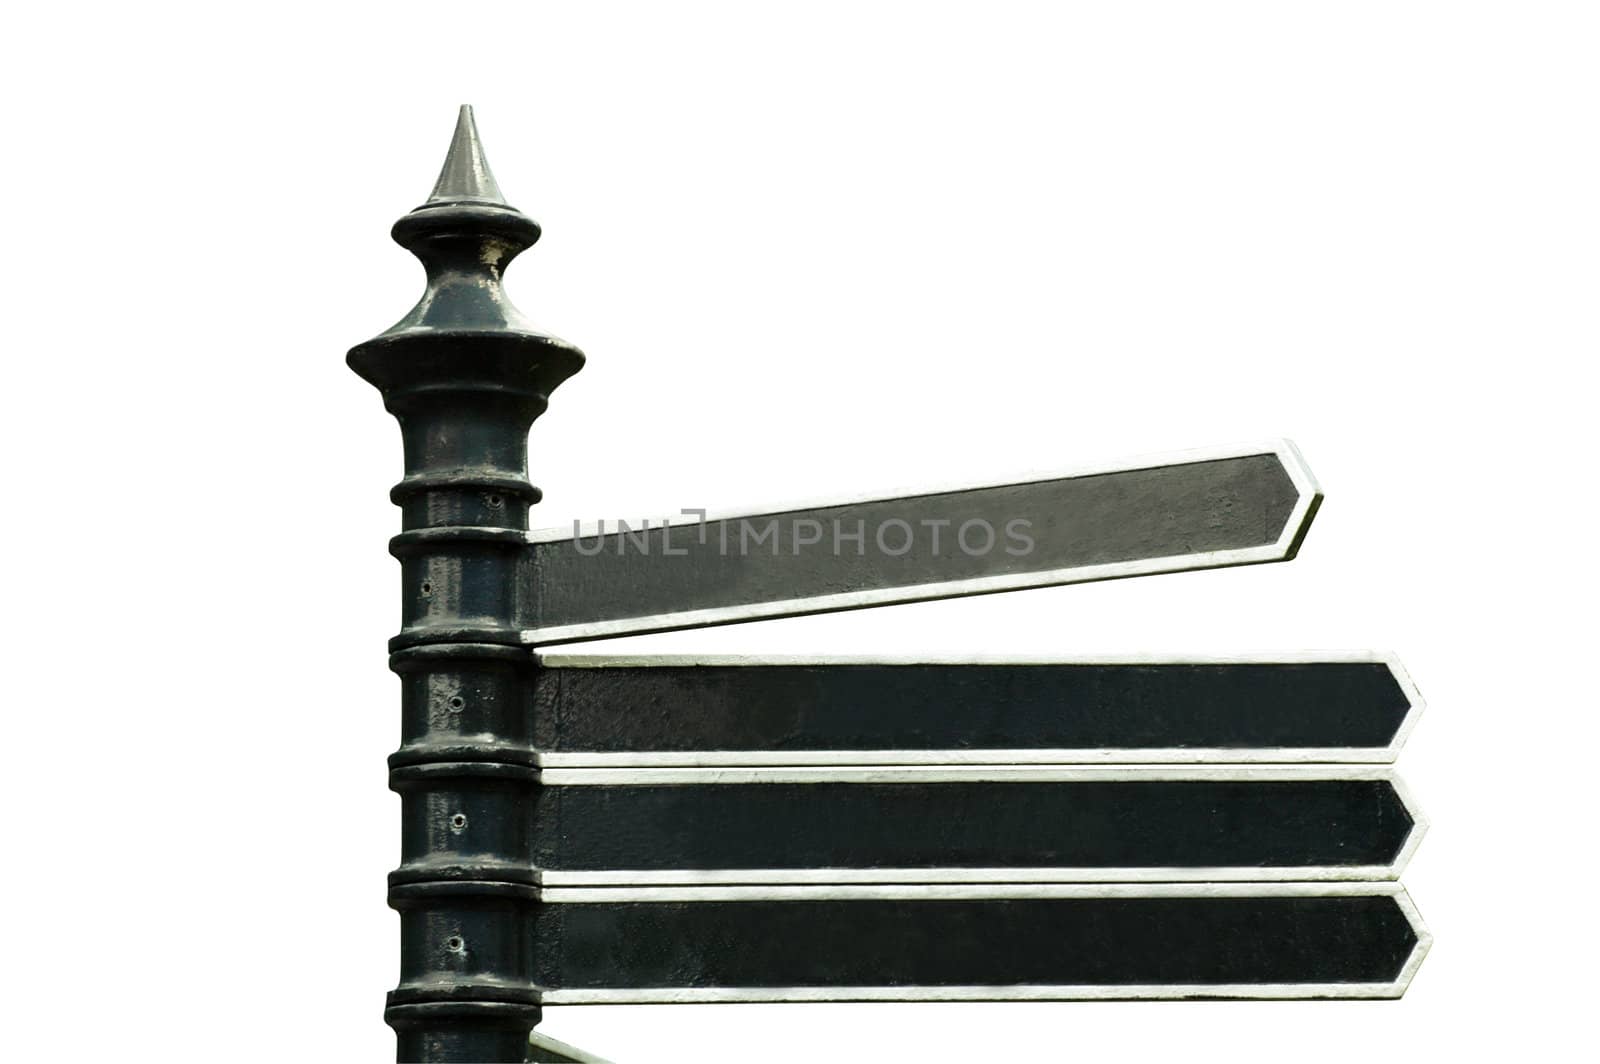 Edged out blank direction signs with clipping path